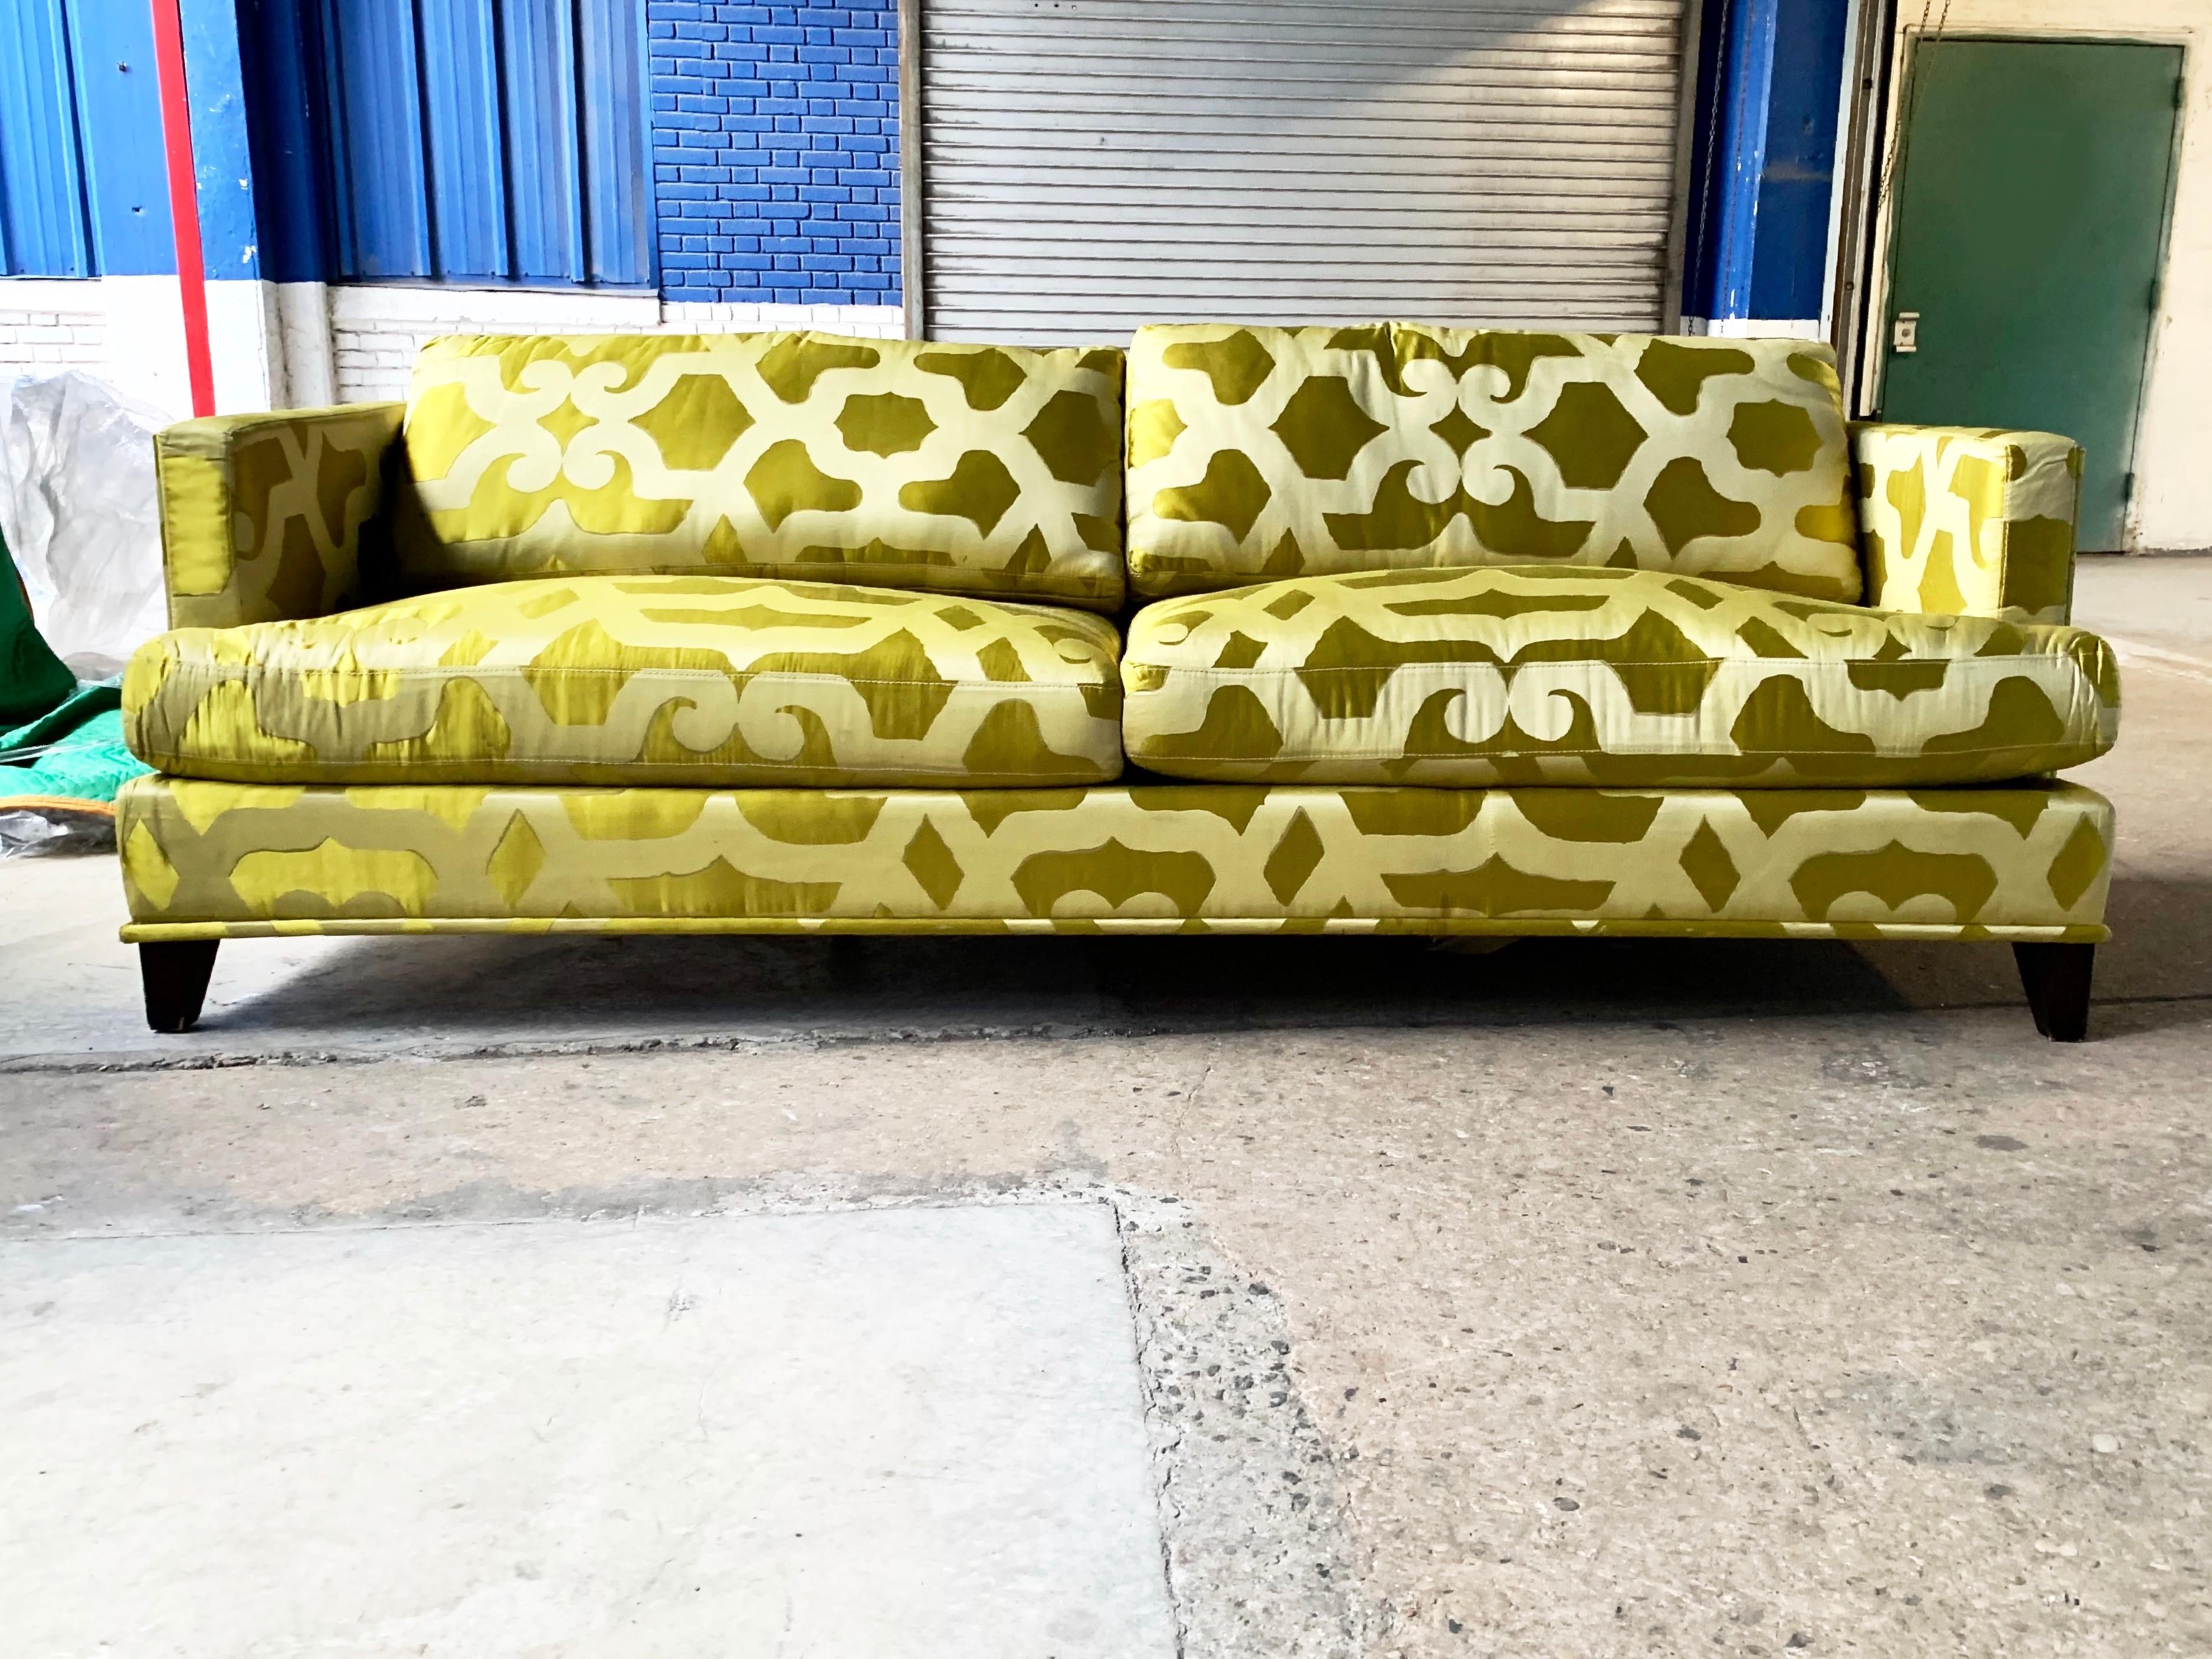 French Chartreuse Silk Quatrefoil 3-Seat Sofa Kravet Couture, Yellow Green Couch.

An Art Deco inspired sofa in a Dual-toned quatrefoil lush chartreuse French silk. Truly stunning. Photos cannot capture the way this piece interacts with the light.